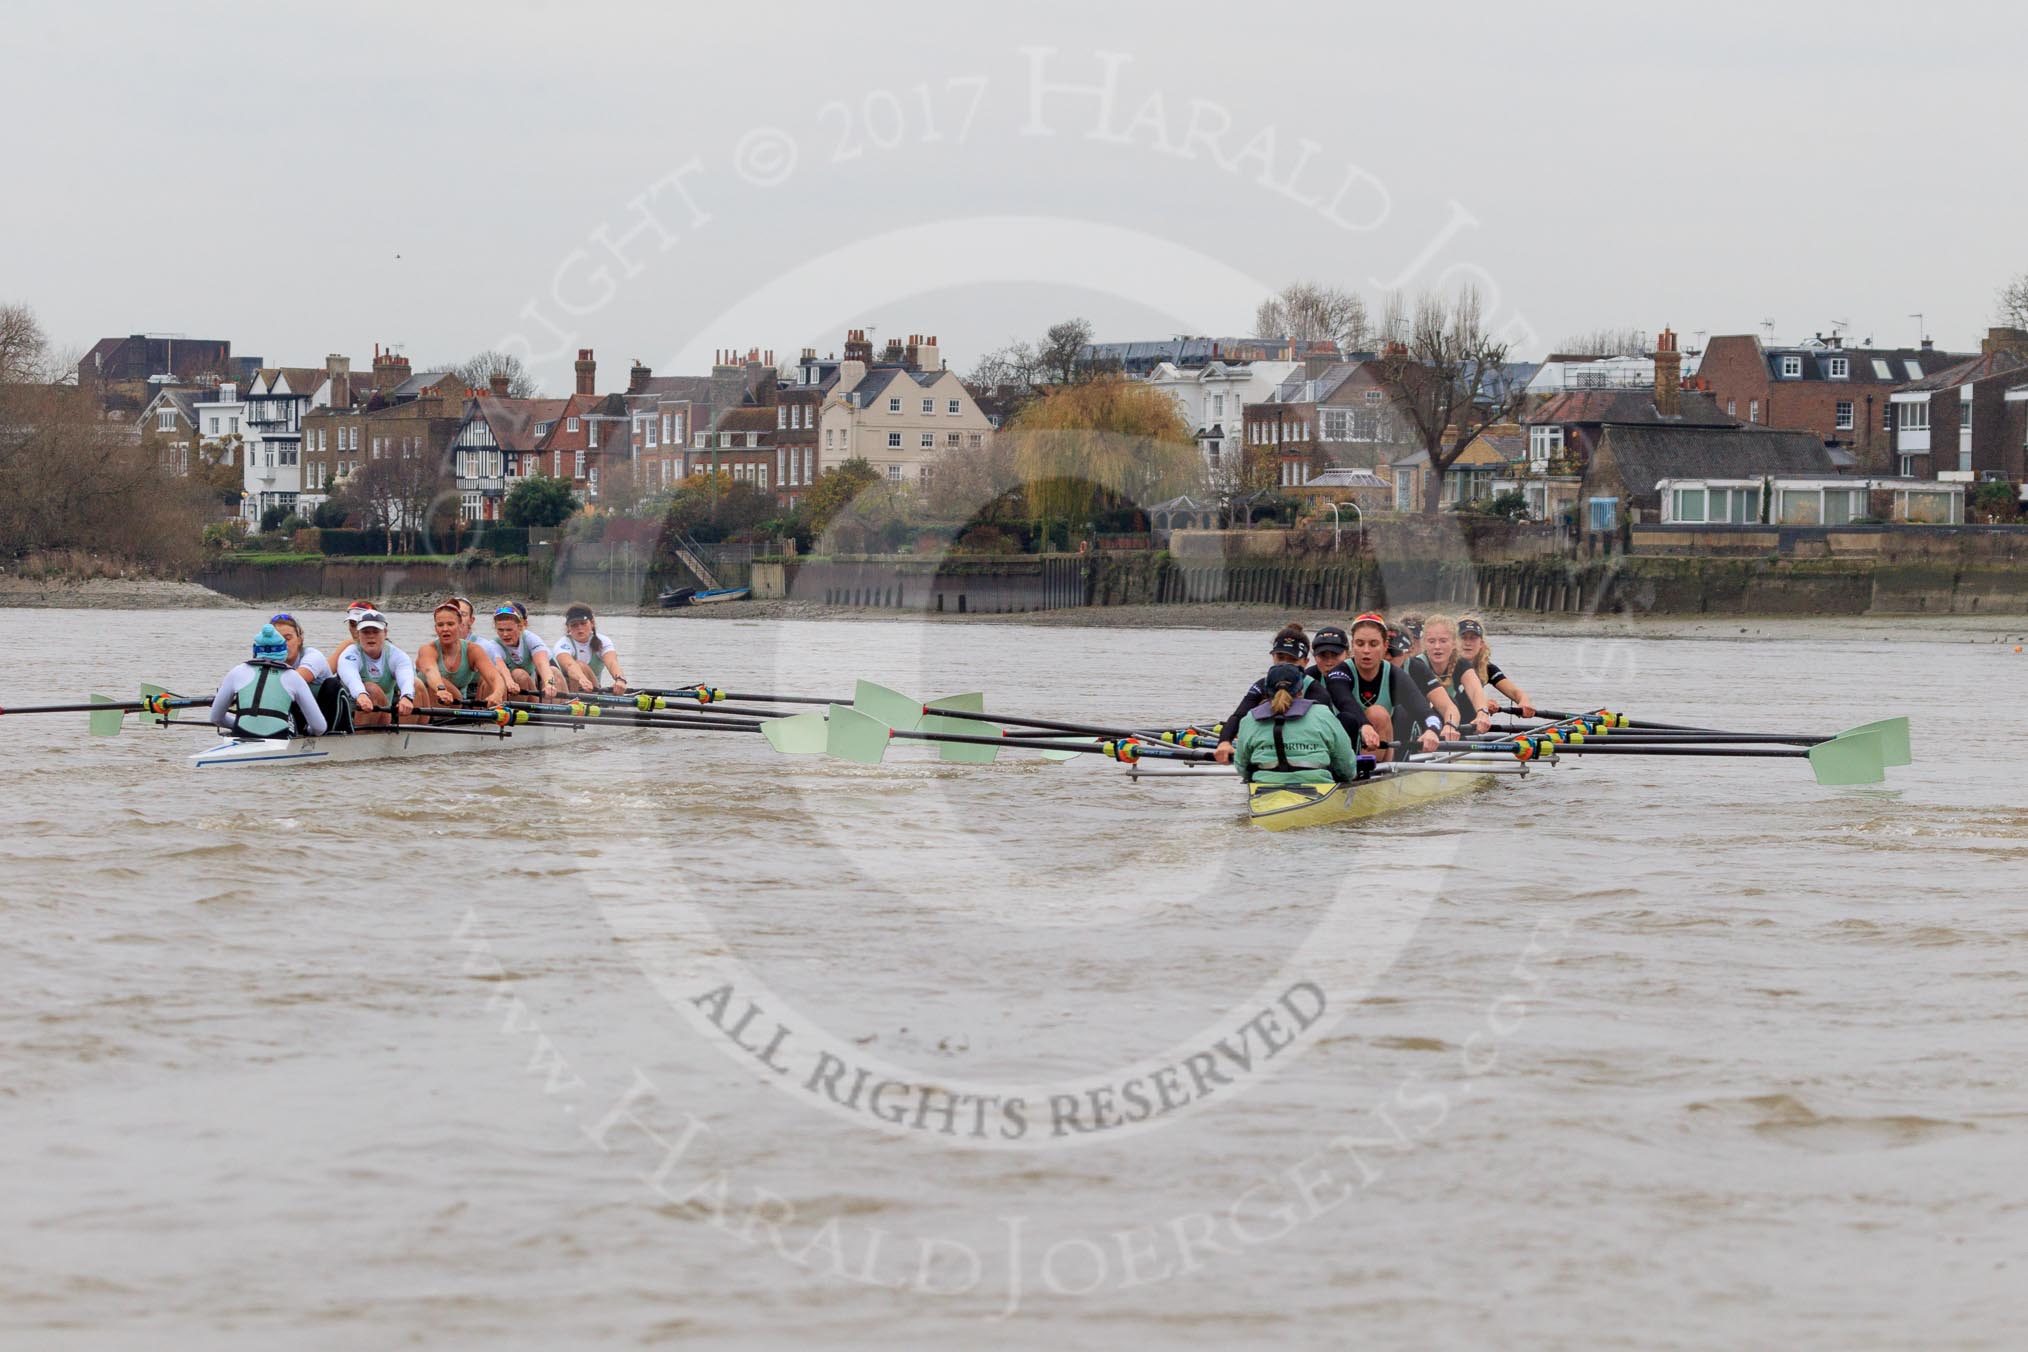 The Boat Race season 2018 - Women's Boat Race Trial Eights (CUWBC, Cambridge): Race umpire Sir Matthew Pinsent had quite a bit of shouting to do as the boats got a bit close at times.
River Thames between Putney Bridge and Mortlake,
London SW15,

United Kingdom,
on 05 December 2017 at 12:52, image #121